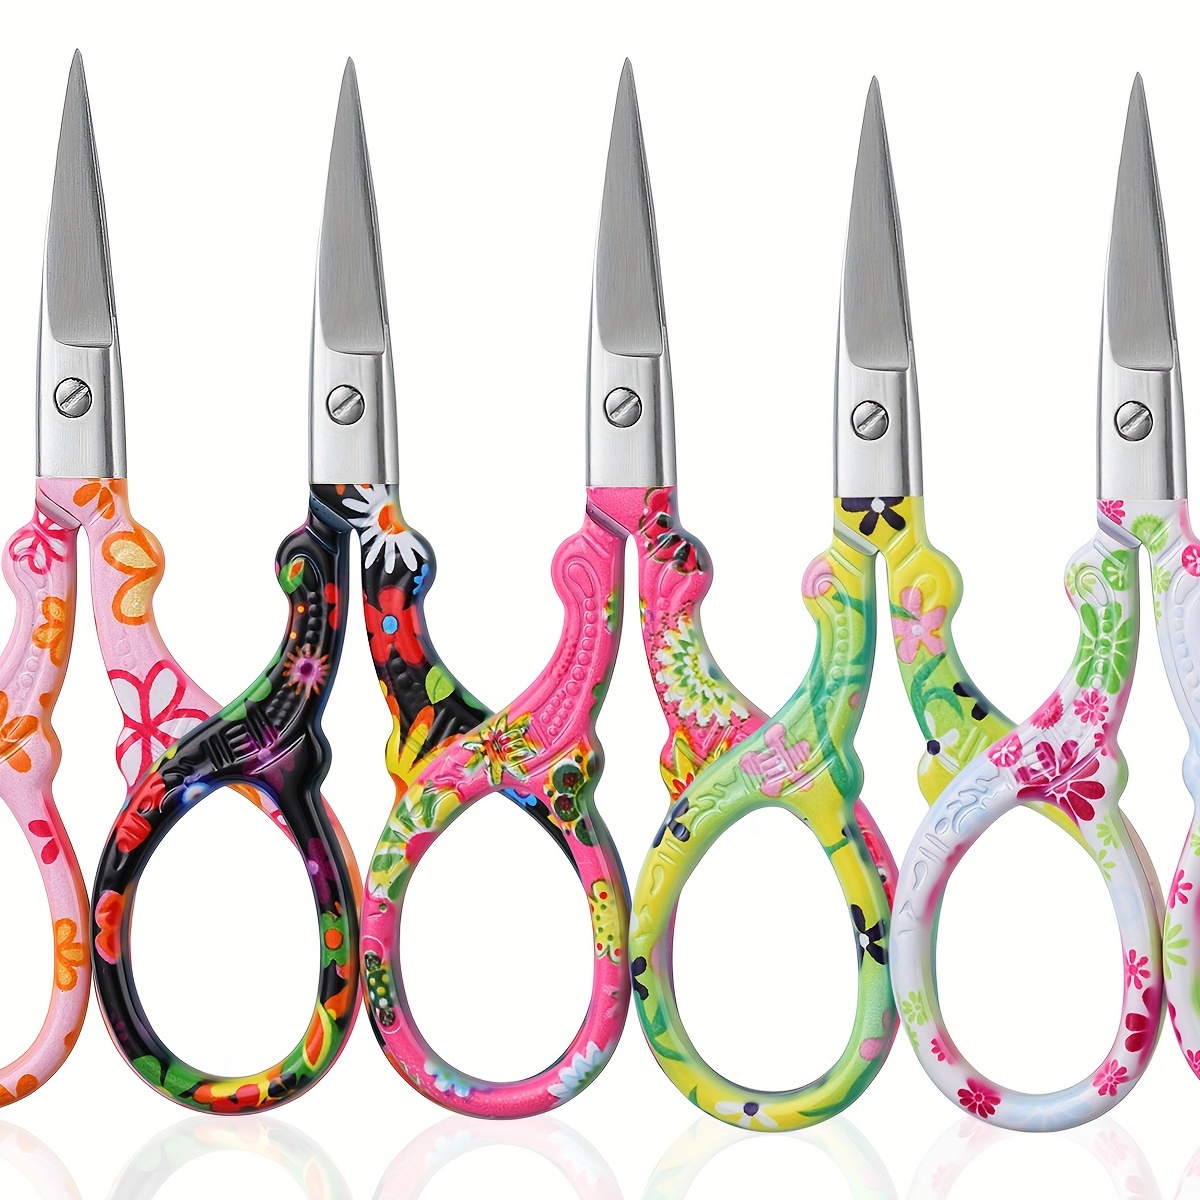 

1pc 3.58in Embroidery Scissors, Stainless Steel Stork Scissors For Sewing, Craft, Art Work & Everyday Use